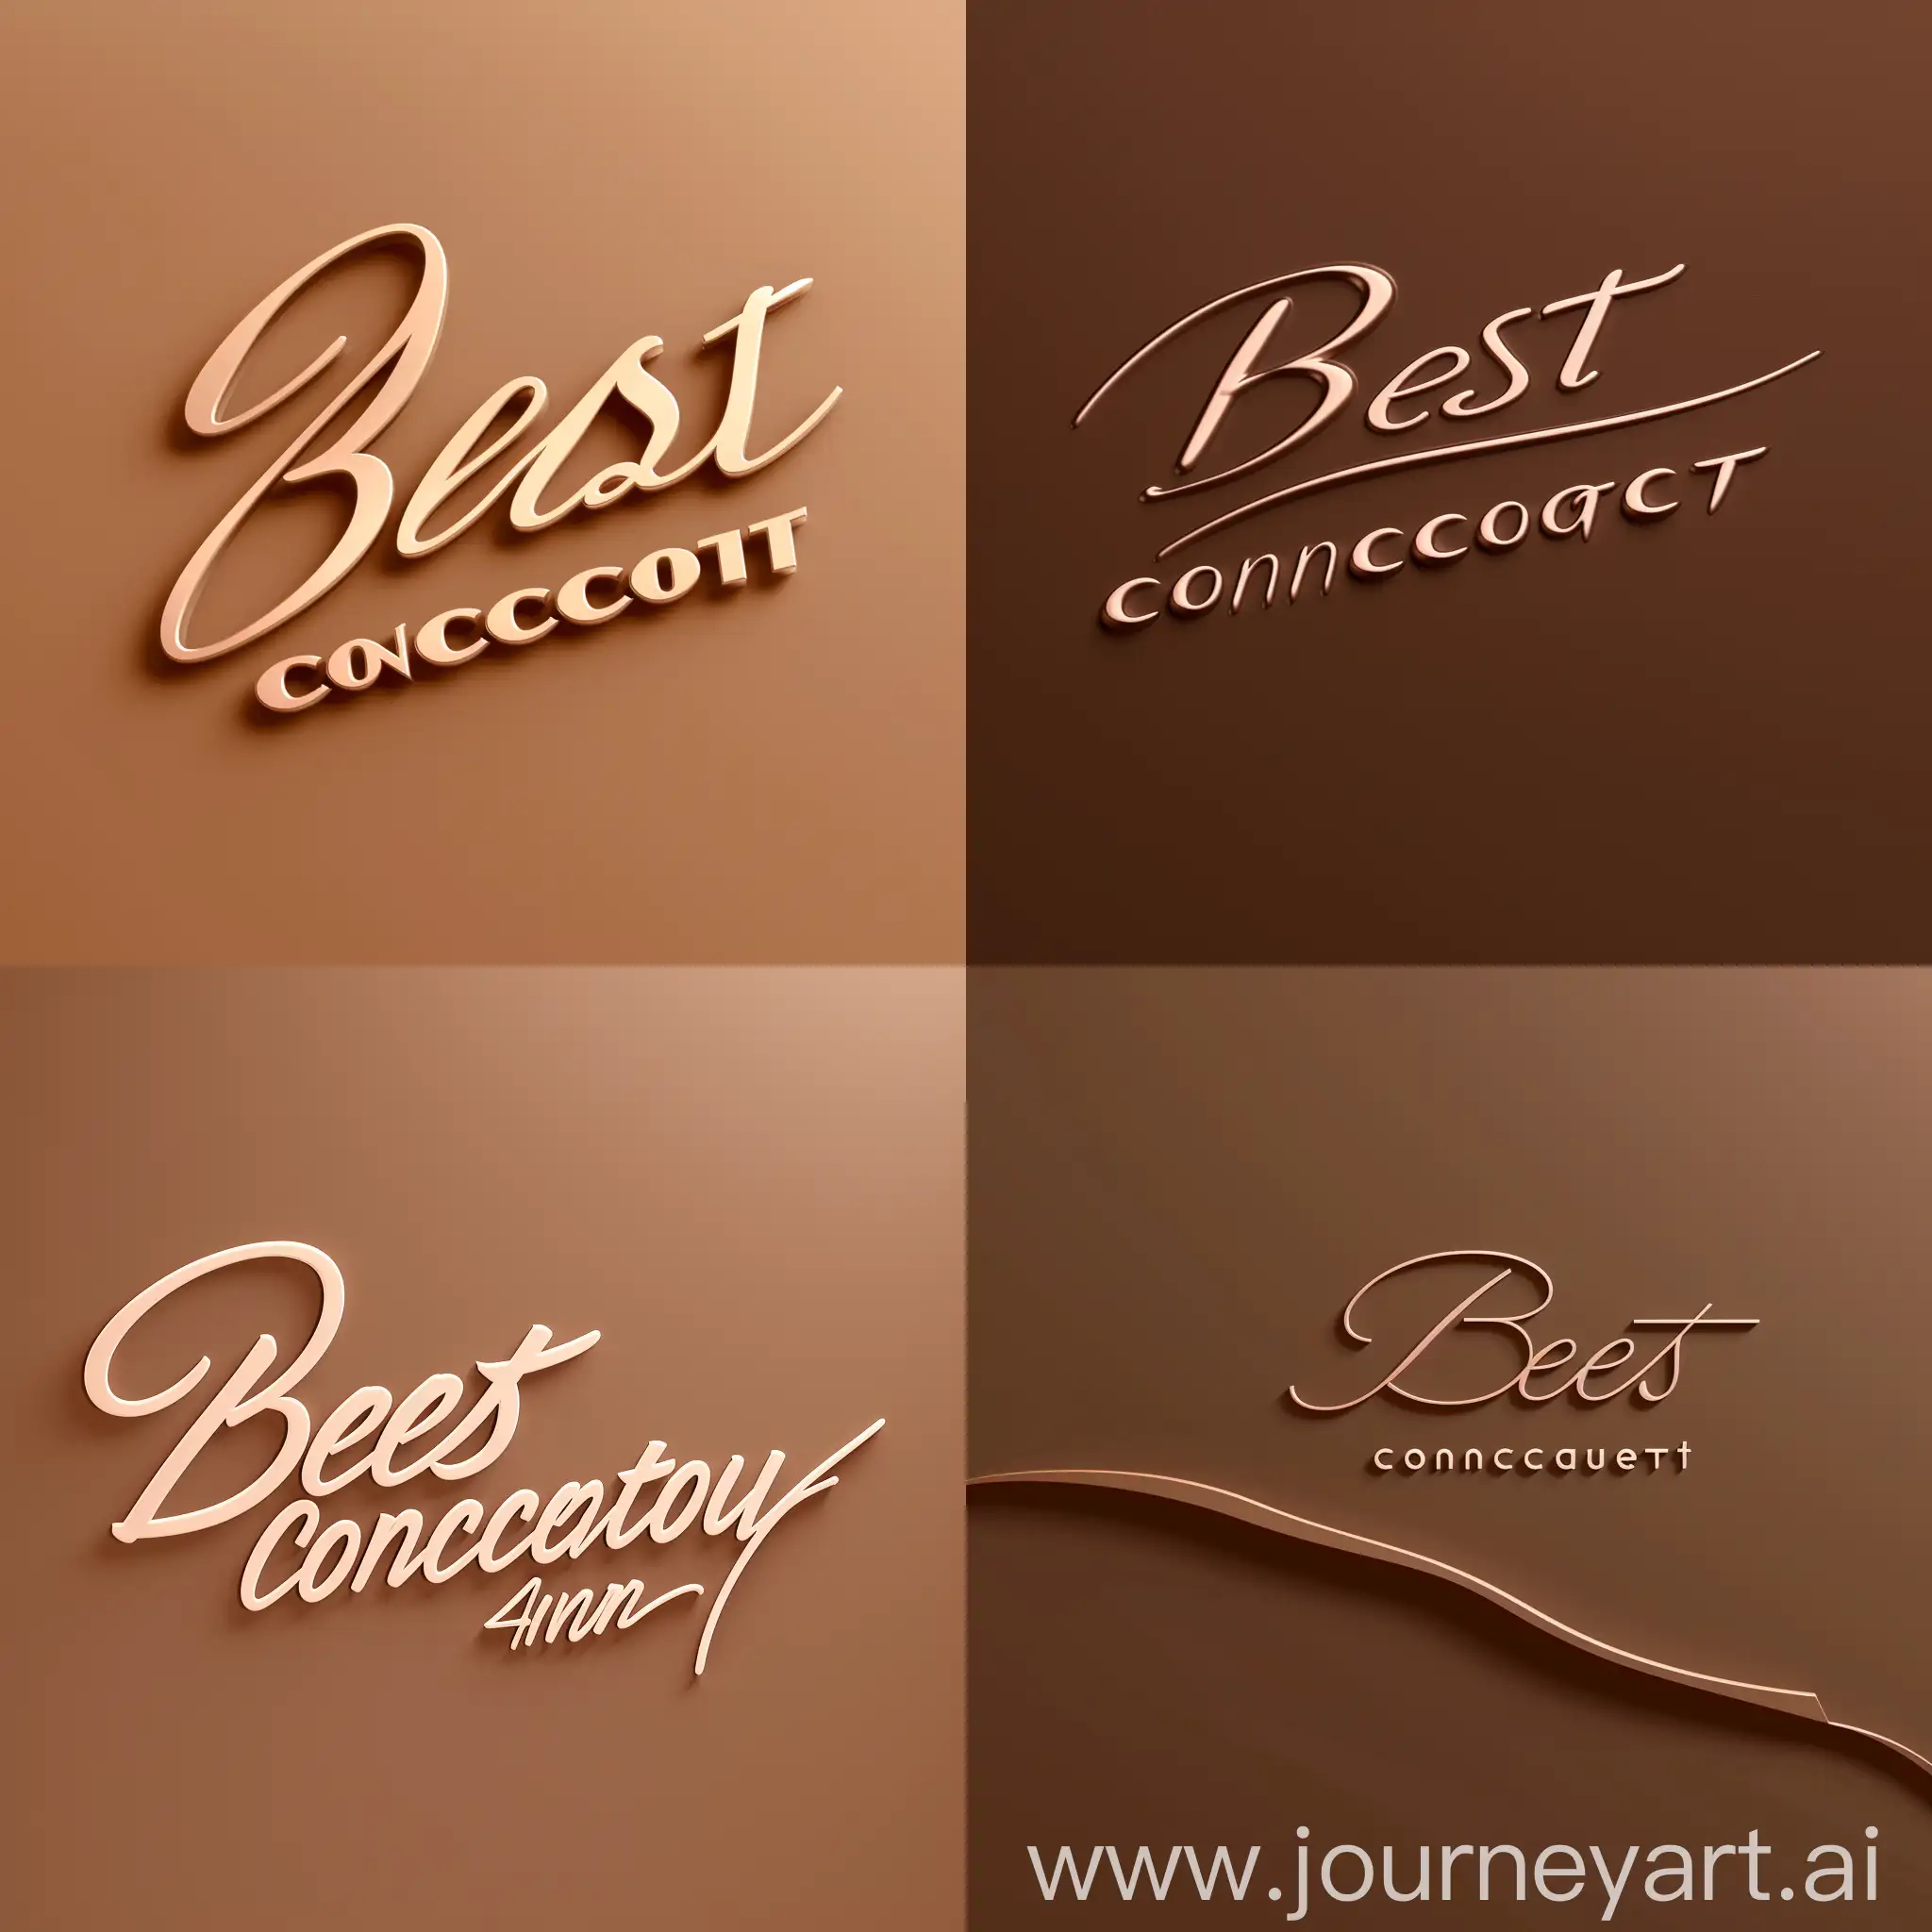 I want a plain brown background logo for my company called "Bestconcept", I want the "Best" highlighted and the "Concept" in miniature below, use a cursive font , 3d, 4k